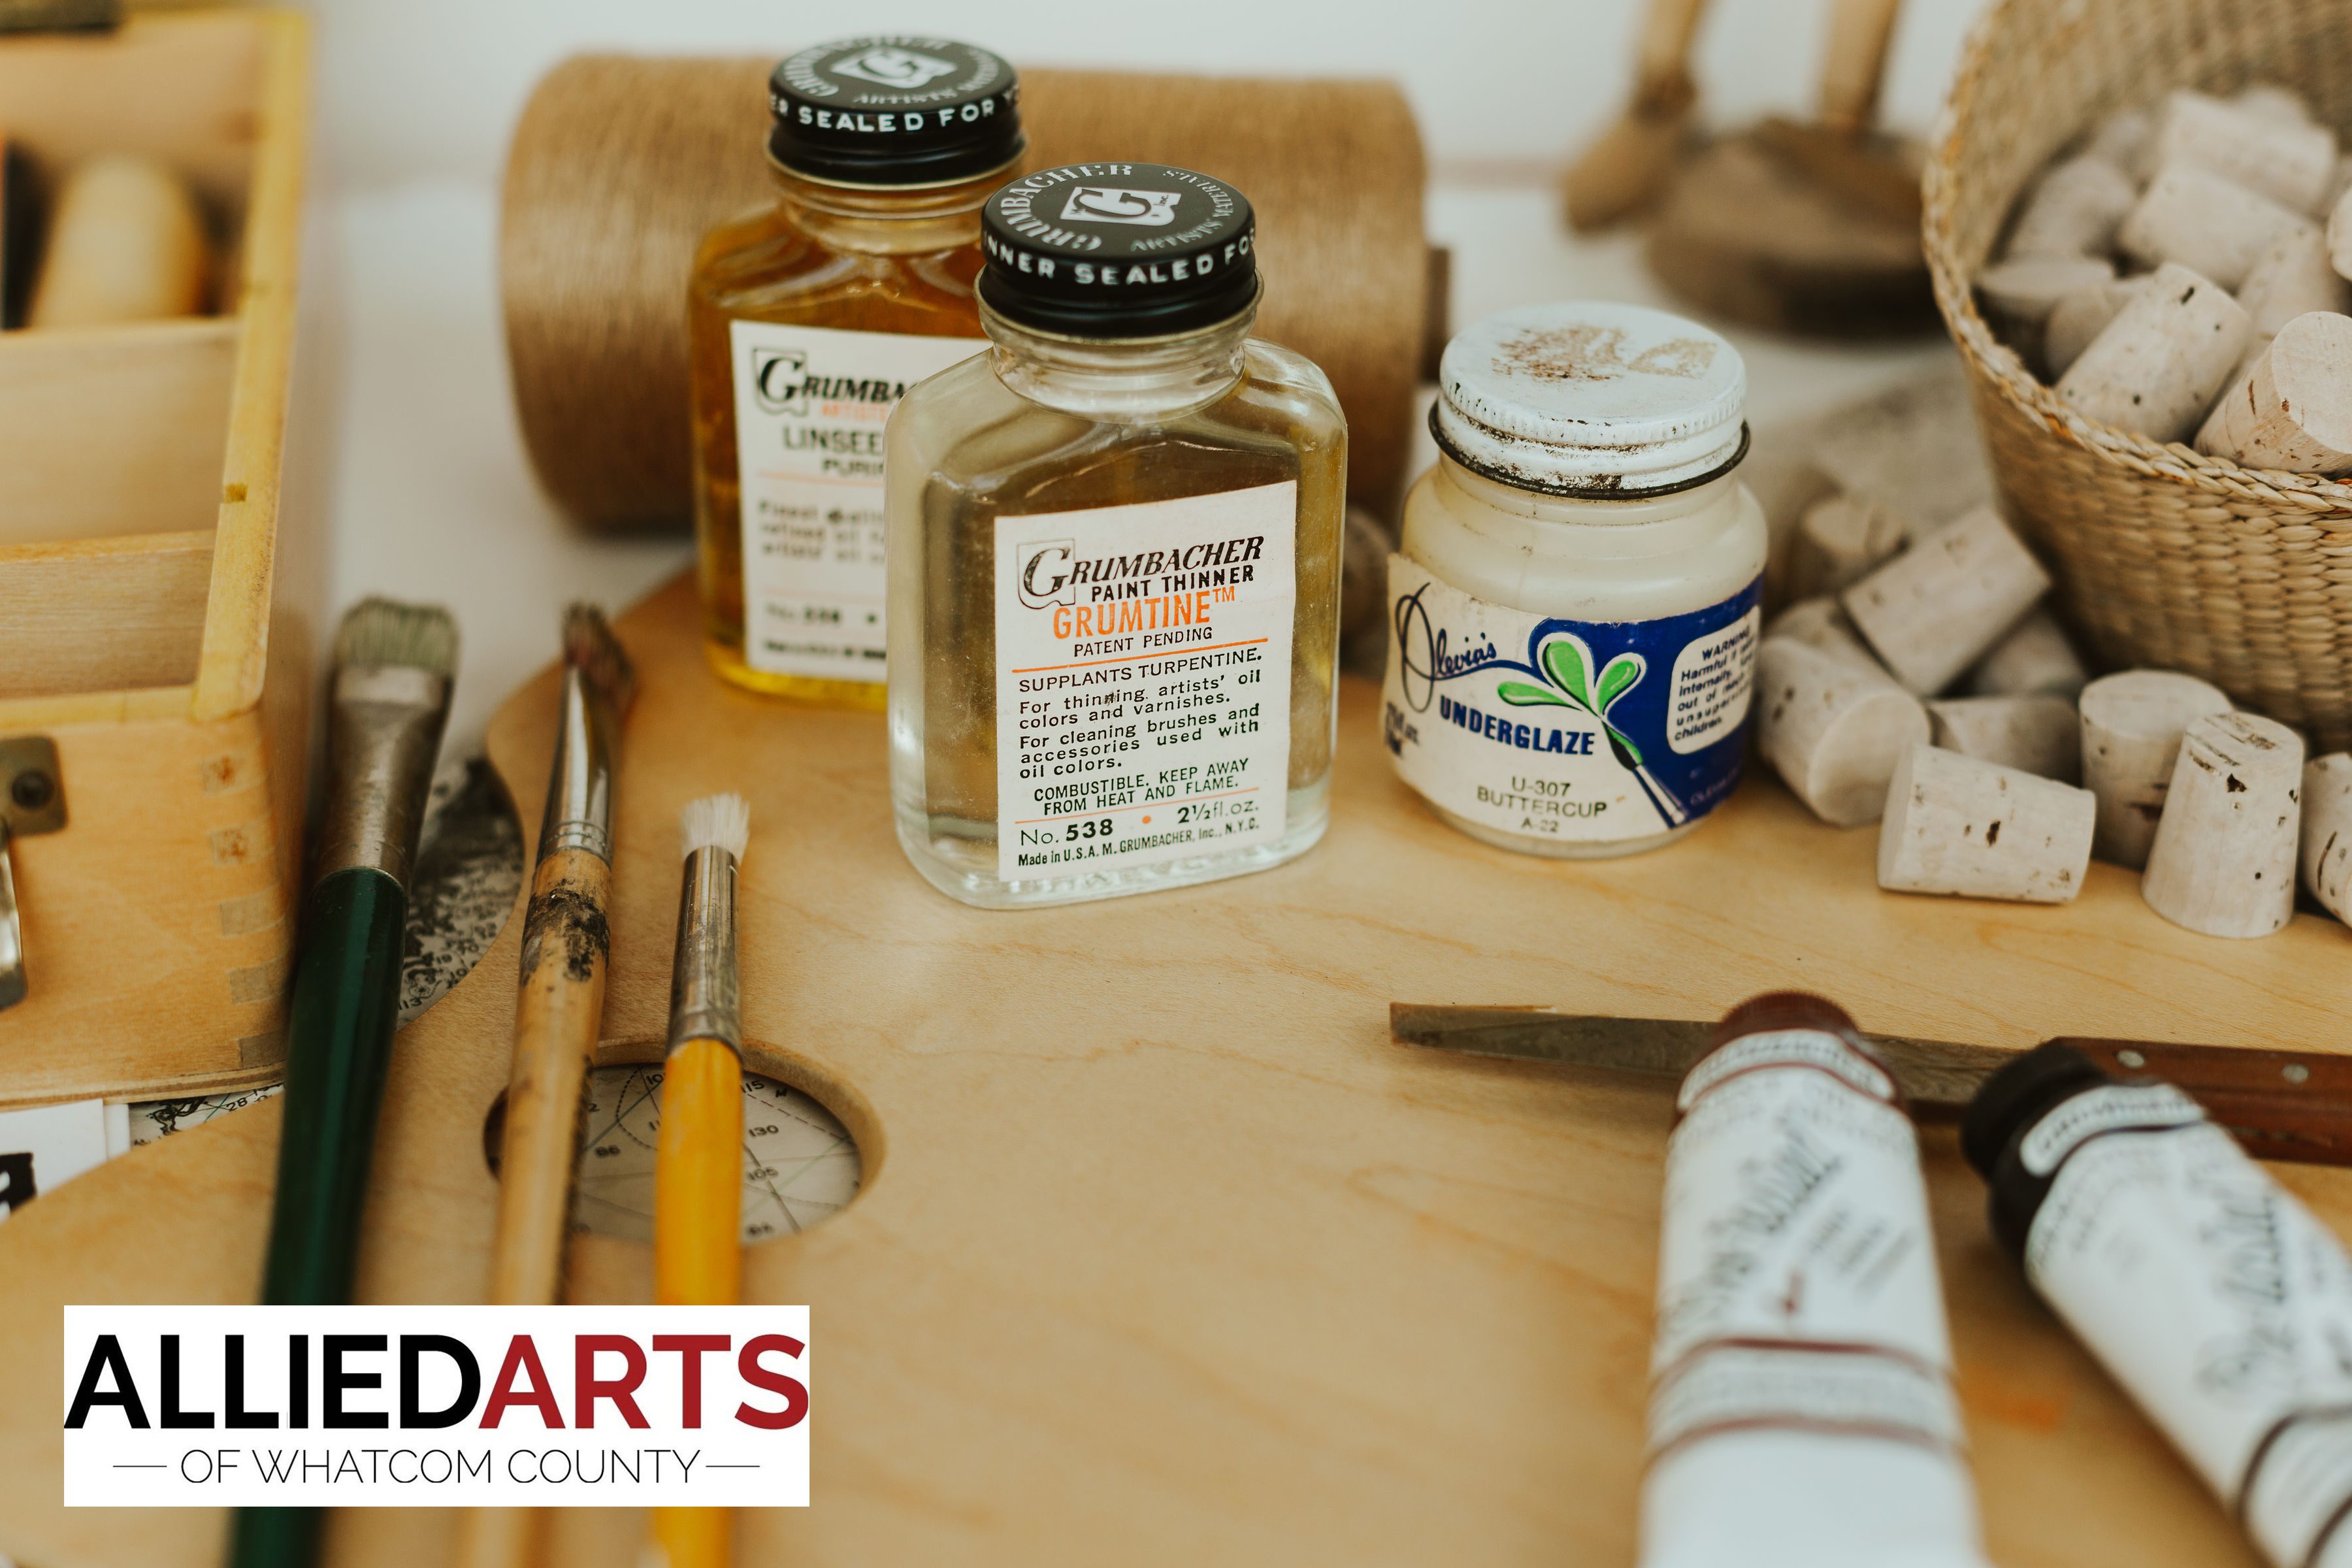 Various art supplies such as paintbrushes, an easel, paint thinner, and corks sitting on a table.